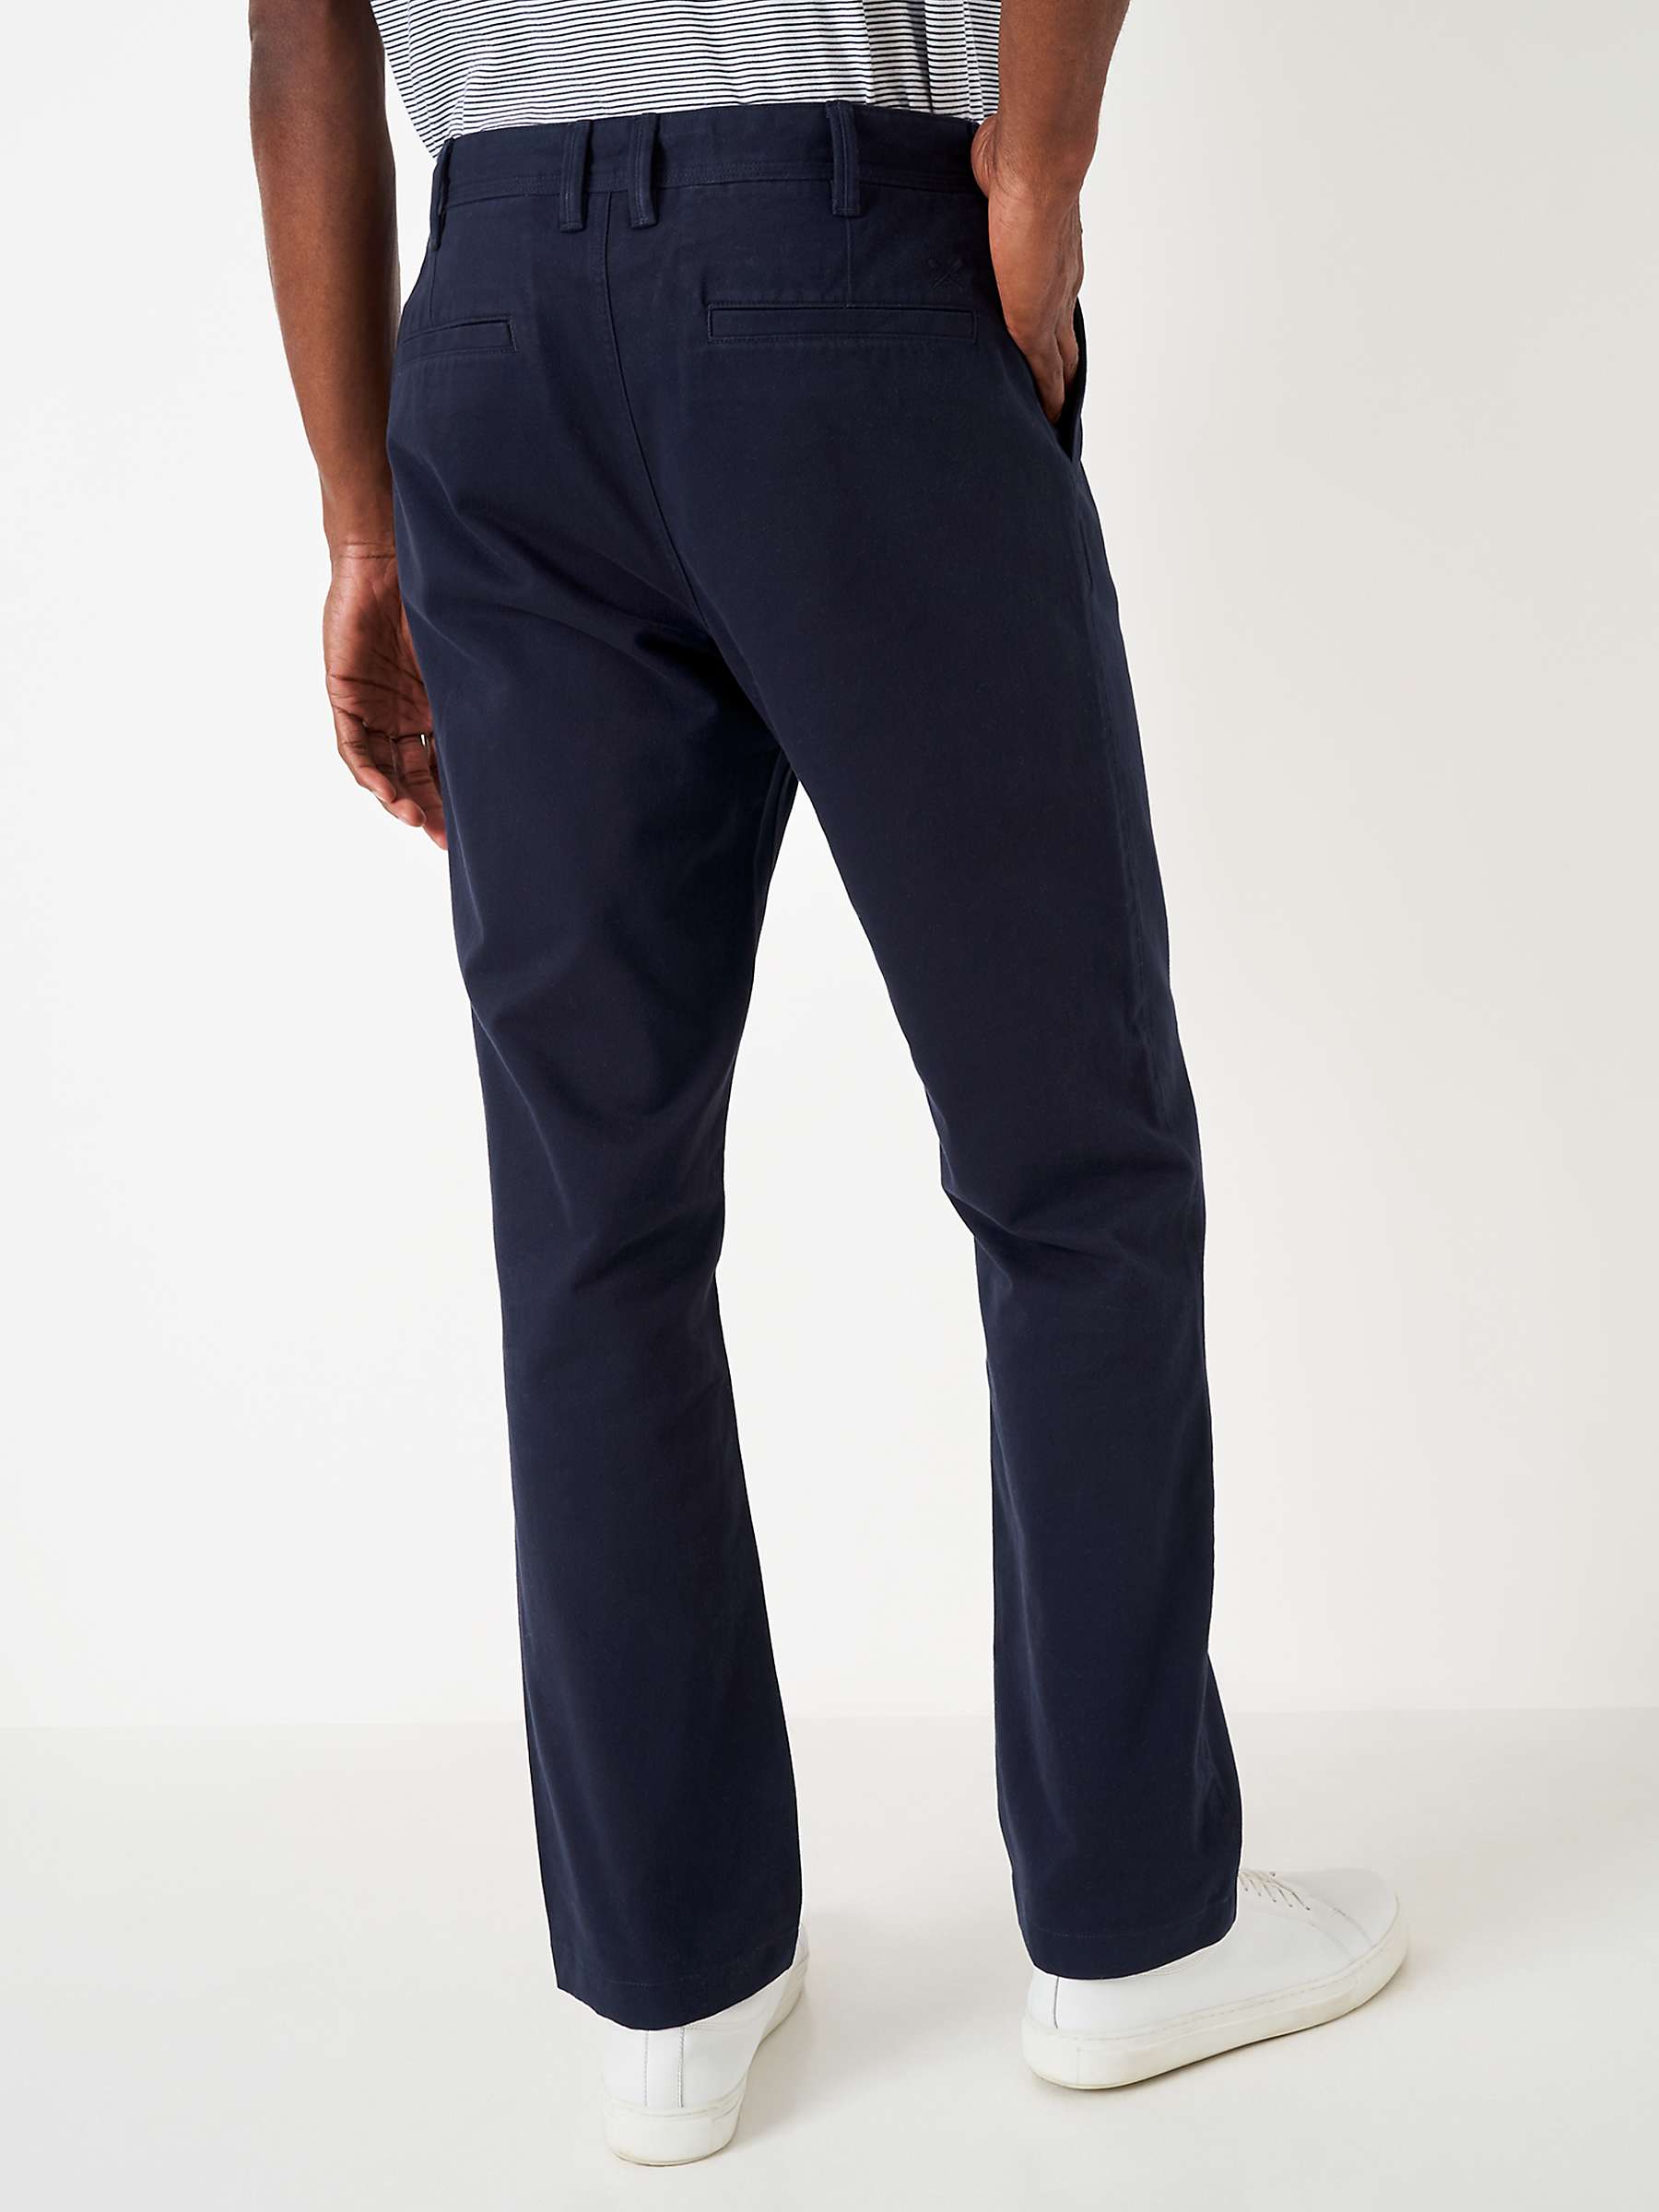 Buy Crew Clothing Cotton Vint Chinos Online at johnlewis.com